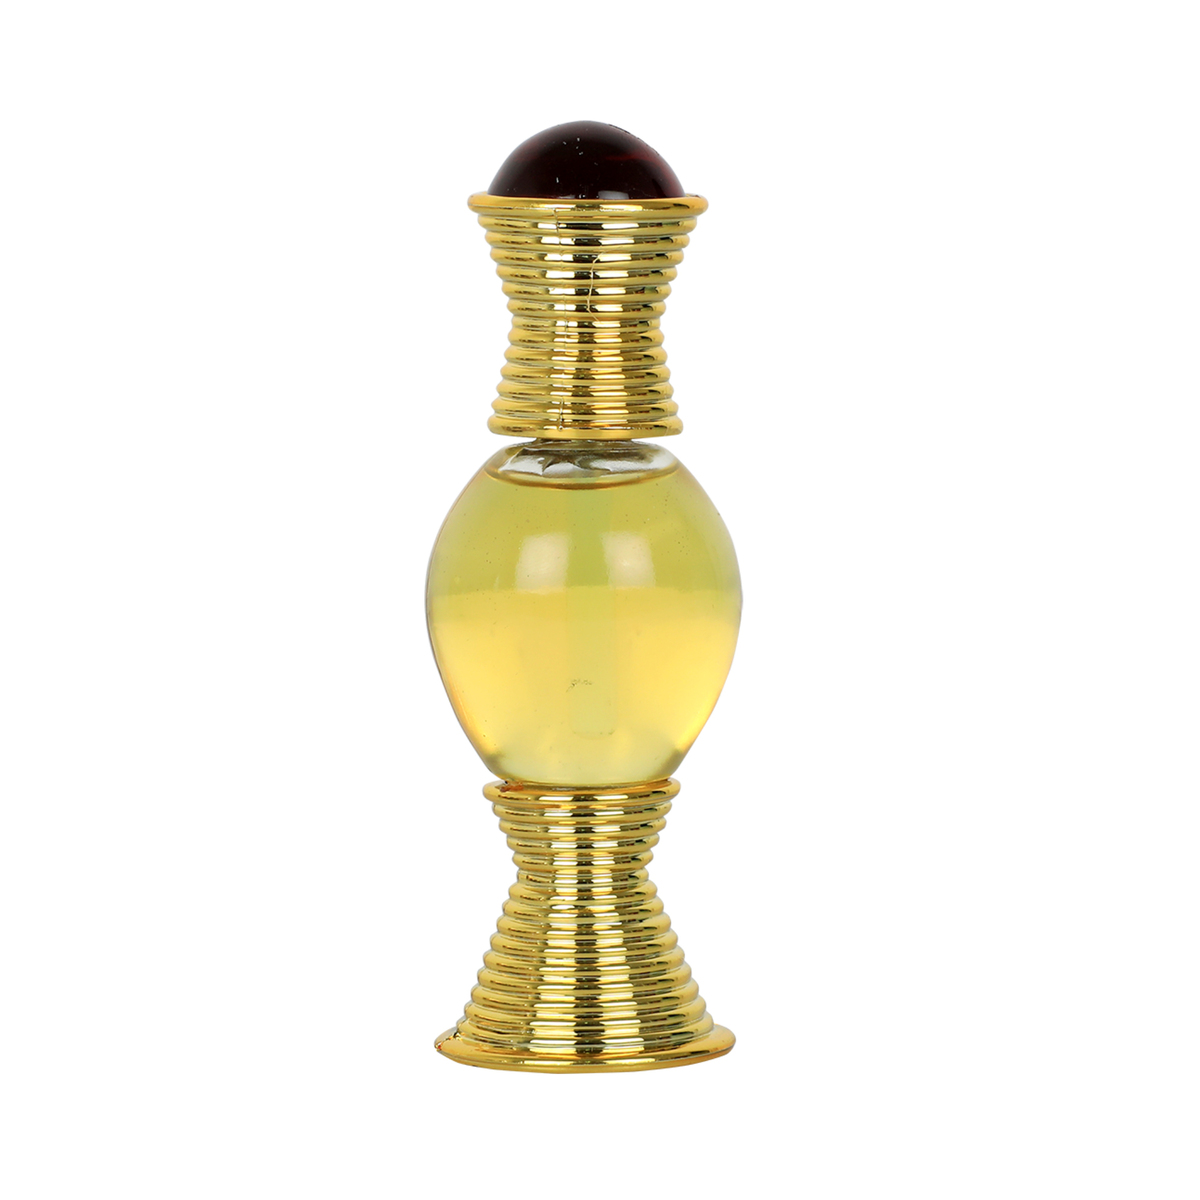 MABT Concentrated Perfume Oil, Mukhallat Noor, 20 ml